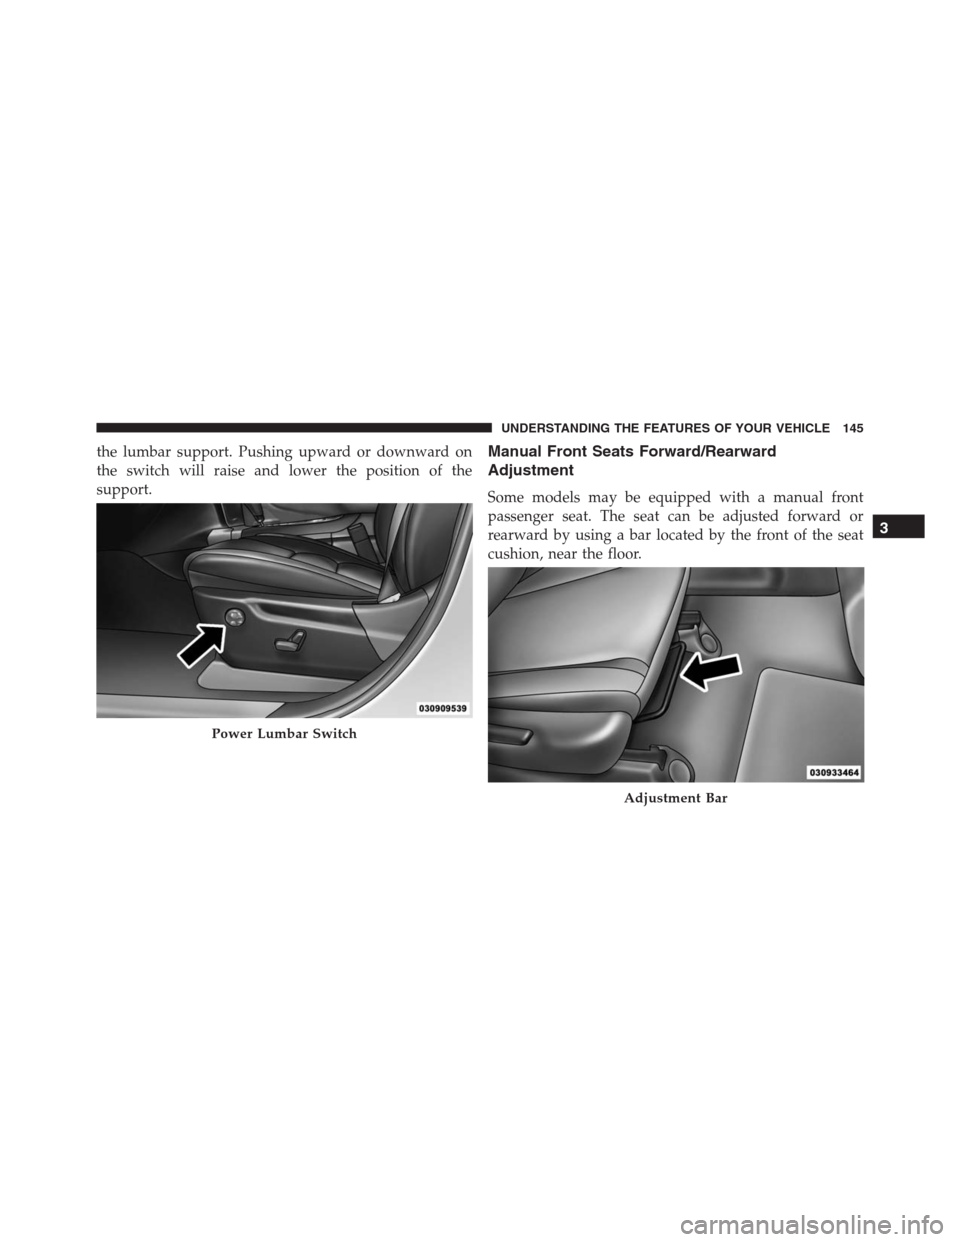 JEEP GRAND CHEROKEE 2015 WK2 / 4.G SRT Owners Manual the lumbar support. Pushing upward or downward on
the switch will raise and lower the position of the
support.Manual Front Seats Forward/Rearward
Adjustment
Some models may be equipped with a manual f